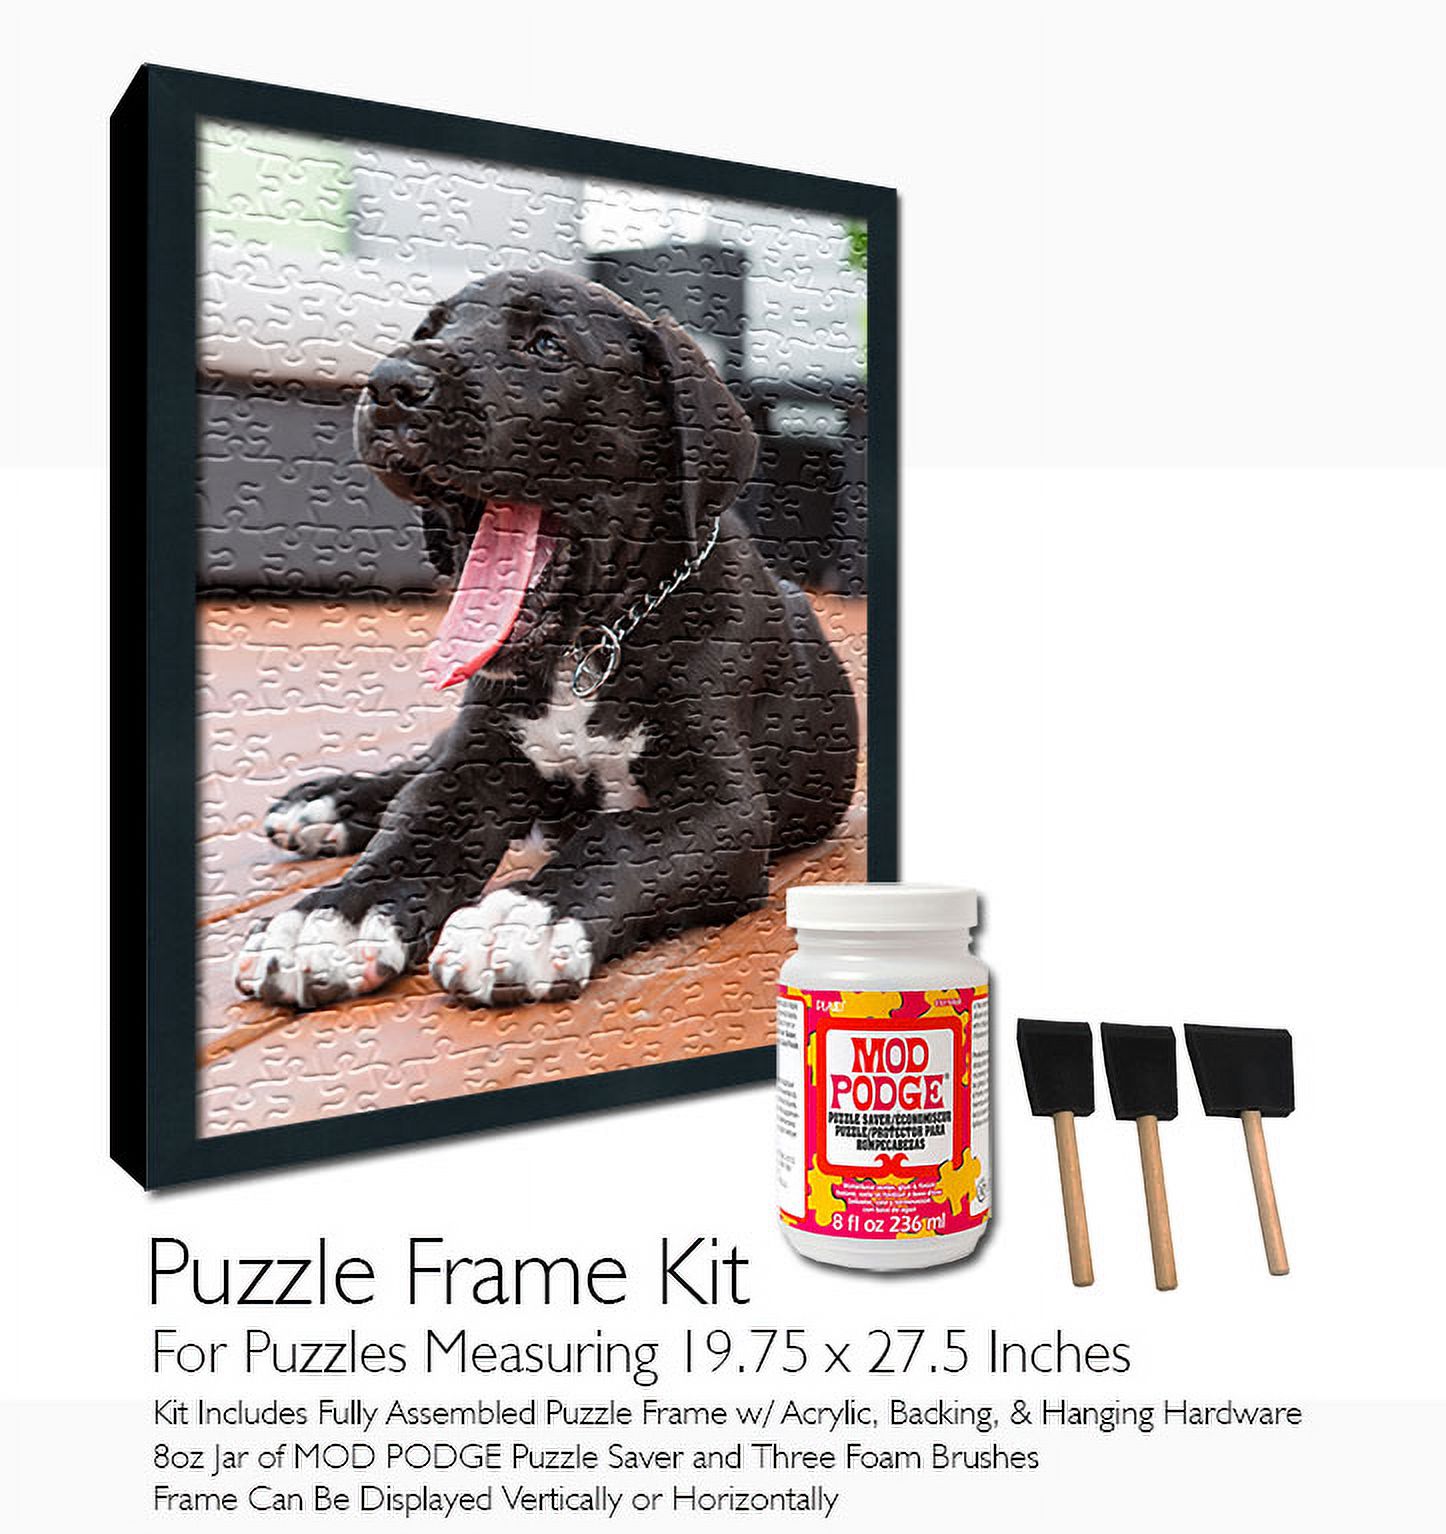 Mod Podge Jigsaw Puzzle Frame Kit - for Puzzles Measuring 19.75x27.5 Inches